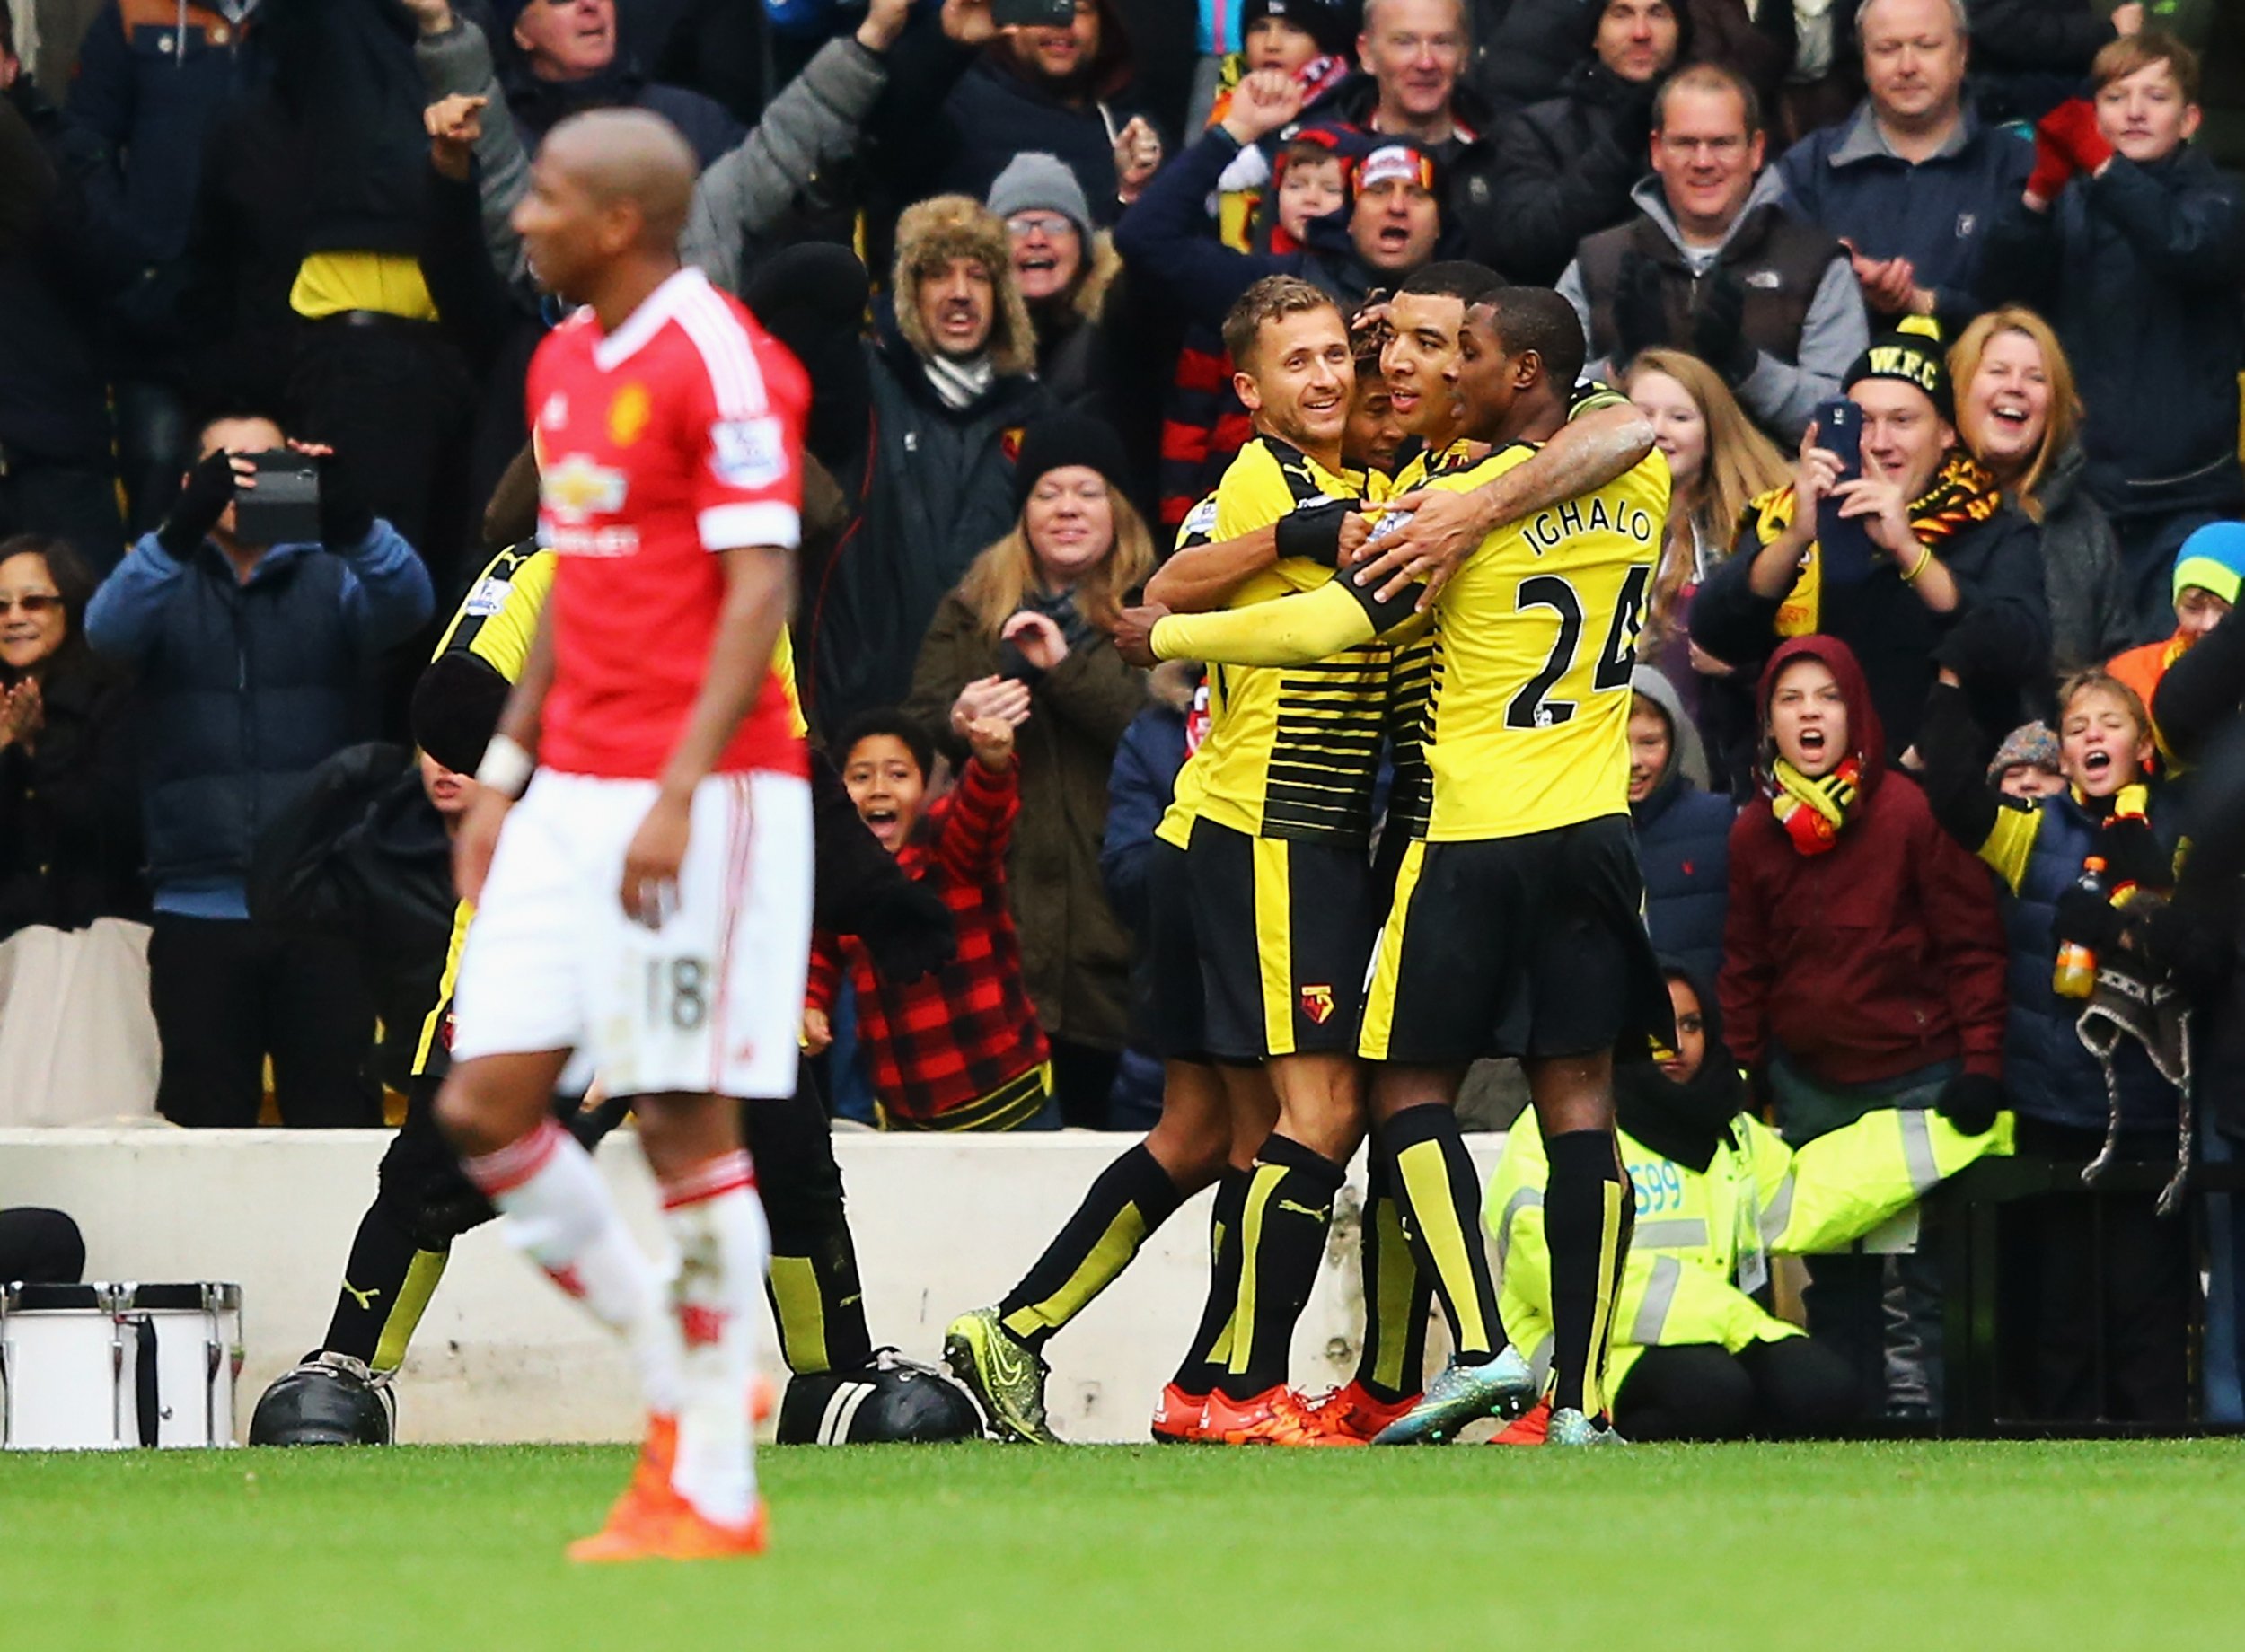 The Barclays Premier League match between Watford and Manchester United at Vicarage Road in November 2015.